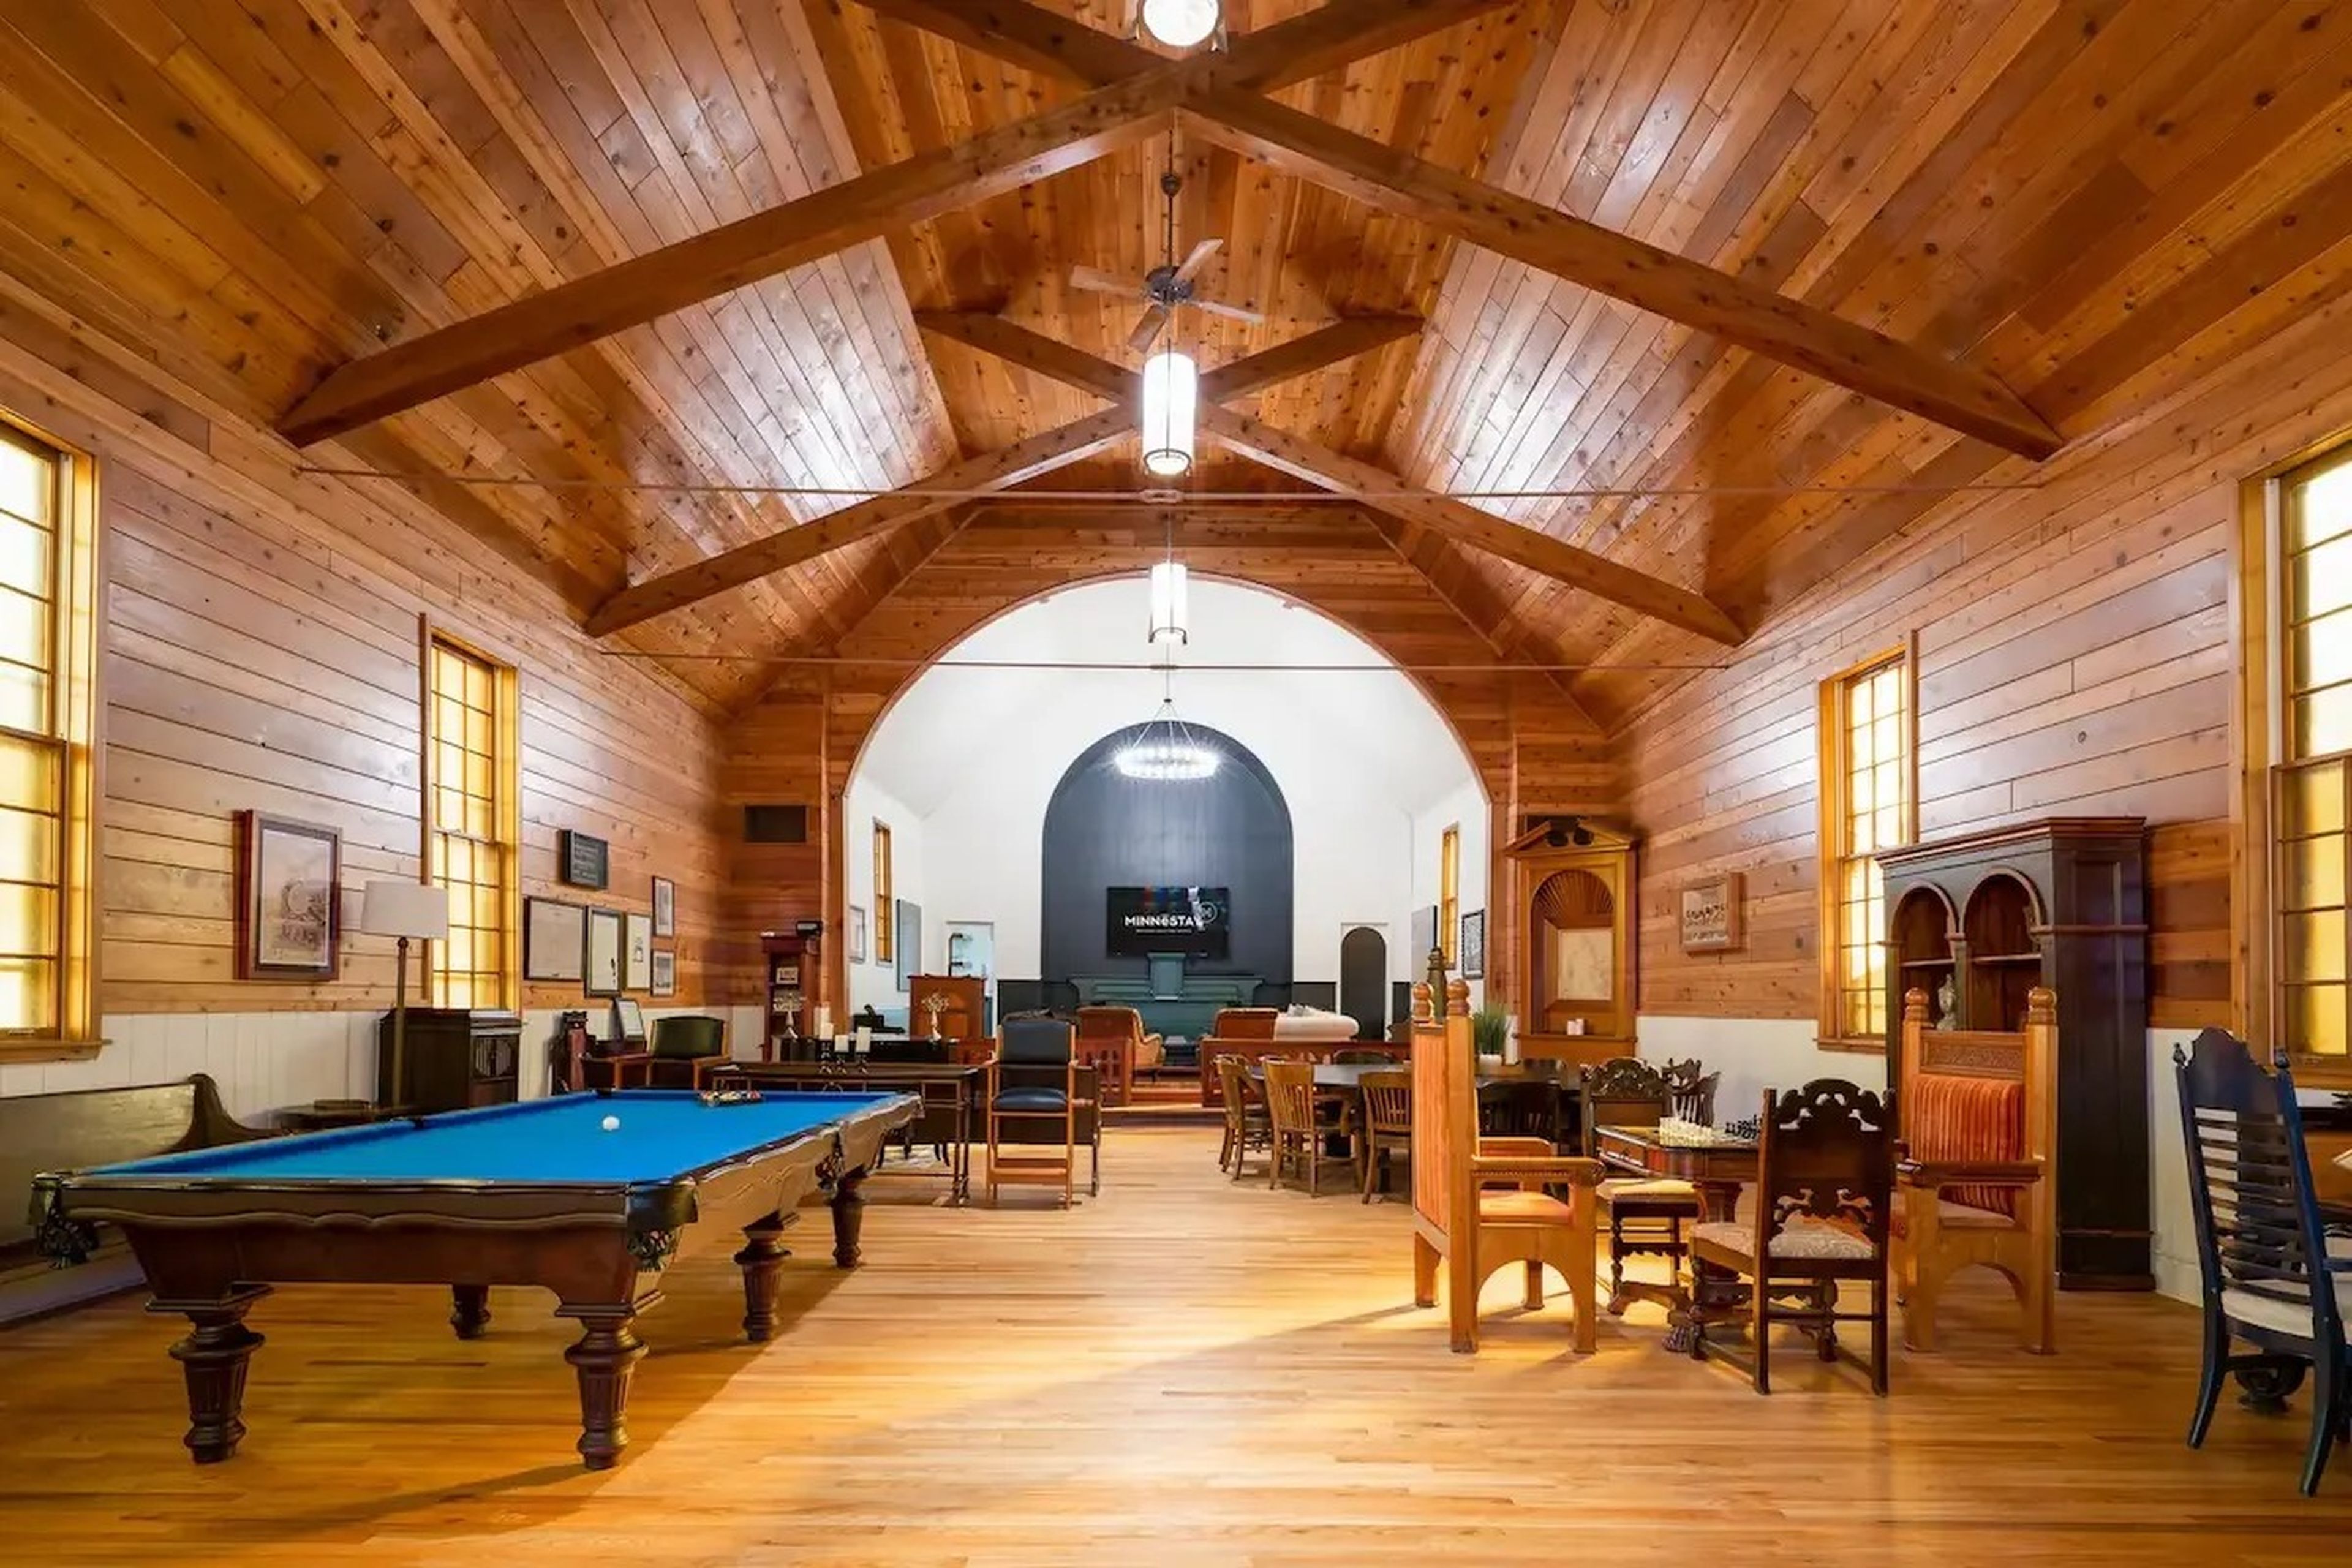 A former church nave decorated as a living space with a pool table and various seating areas.